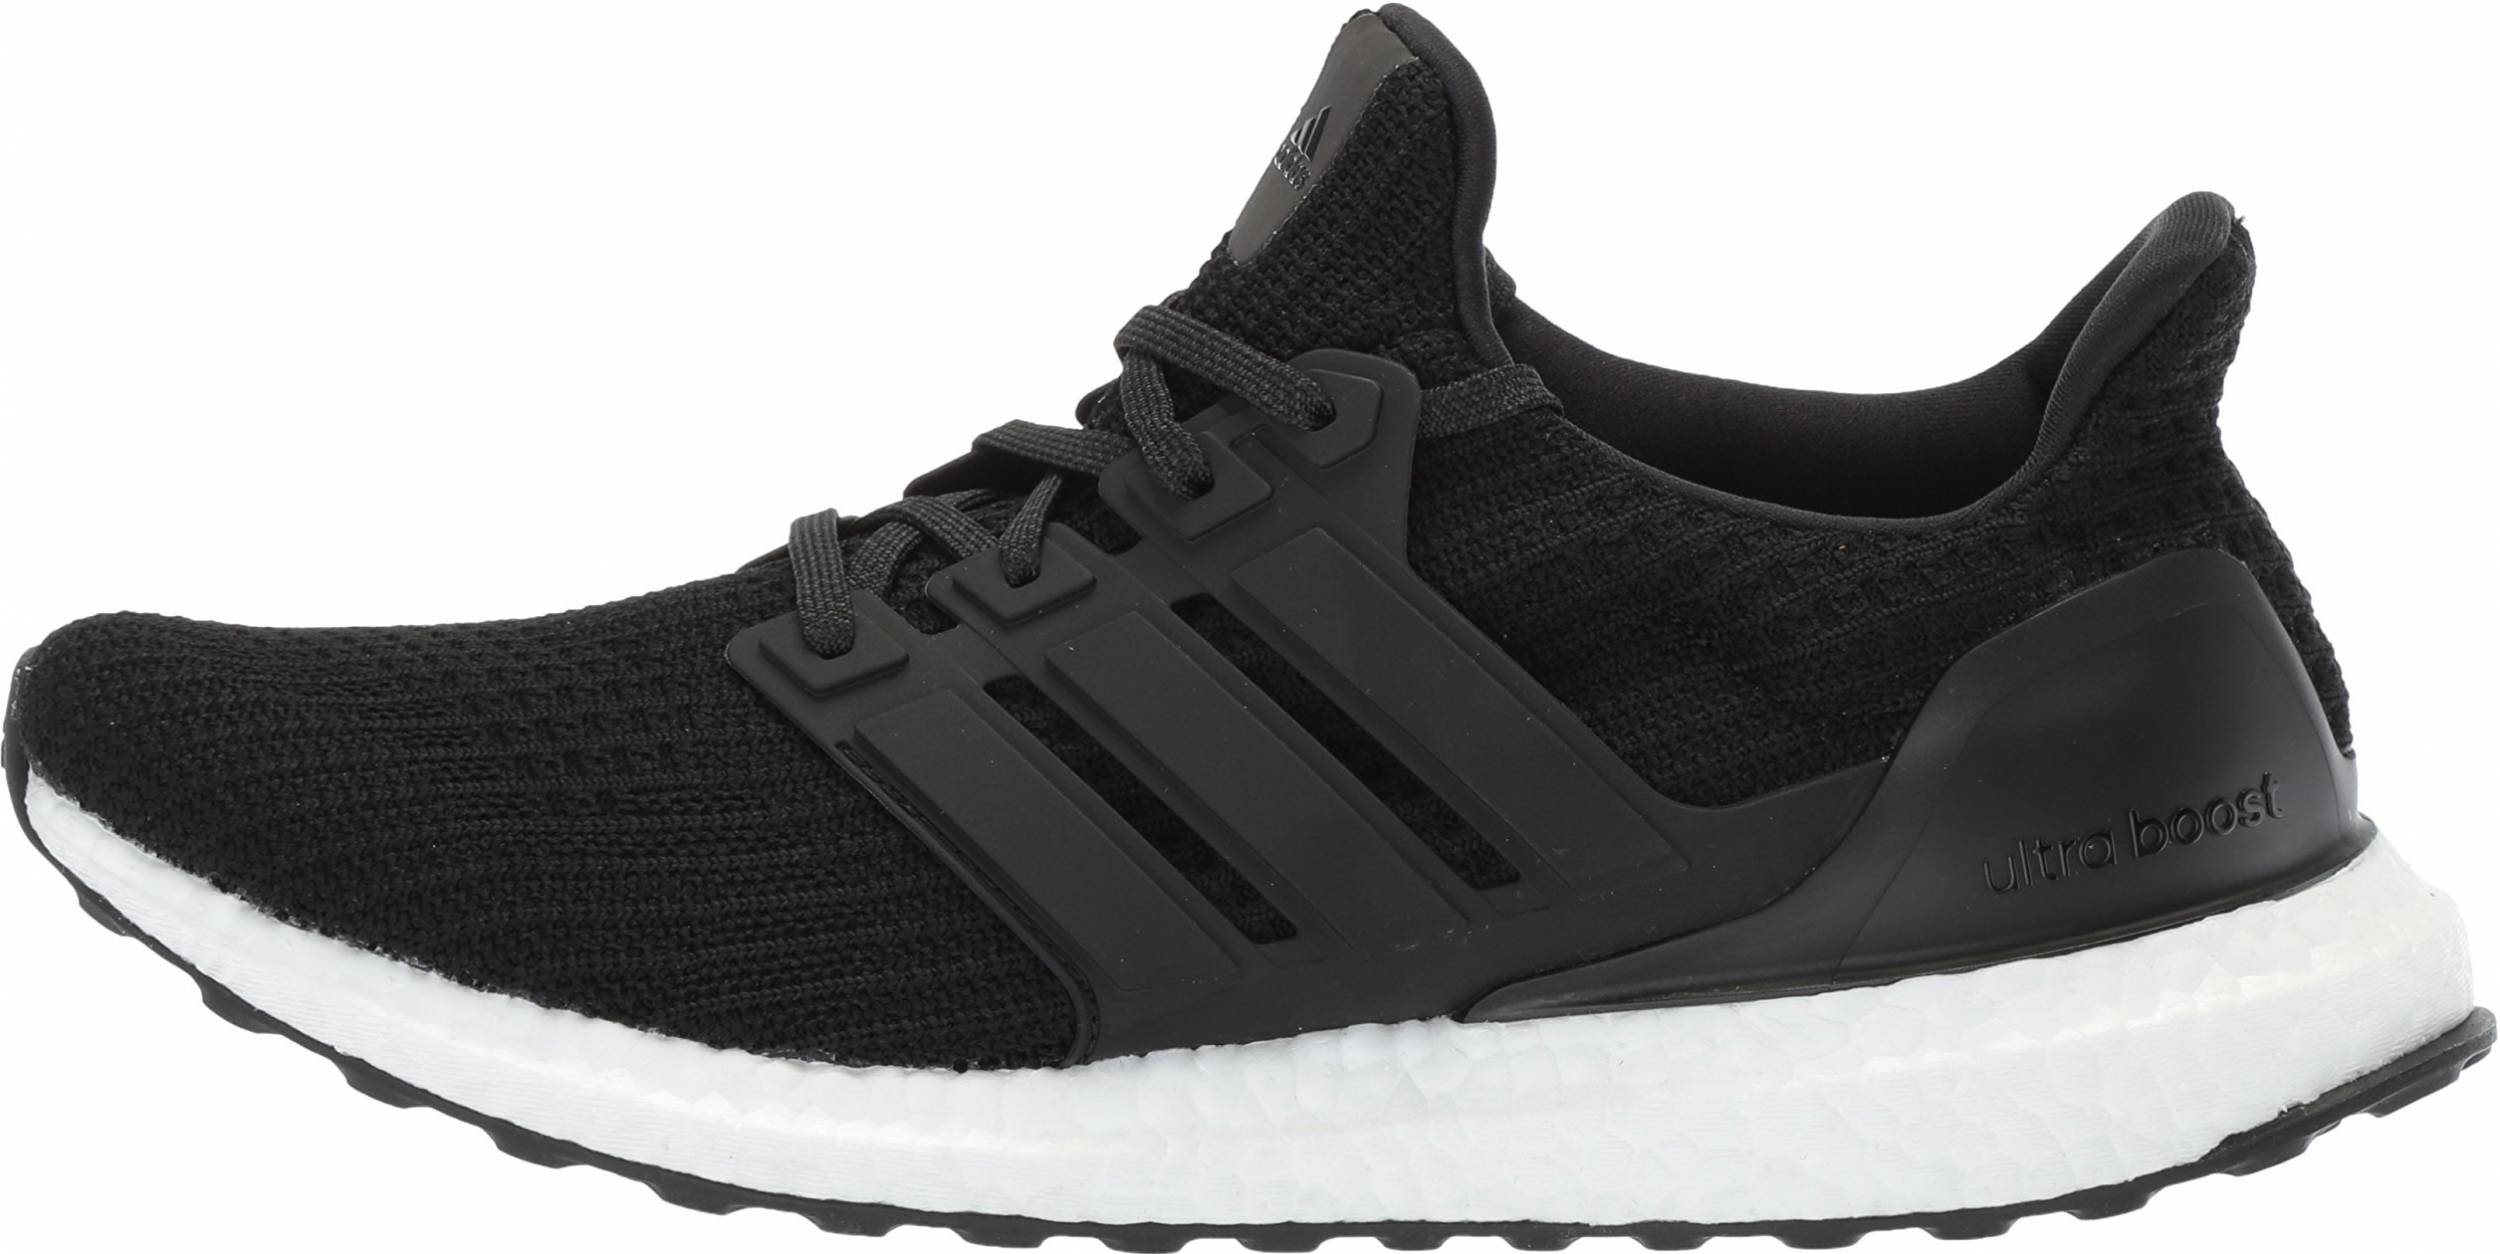 Only $77 + Review of Adidas Ultraboost 